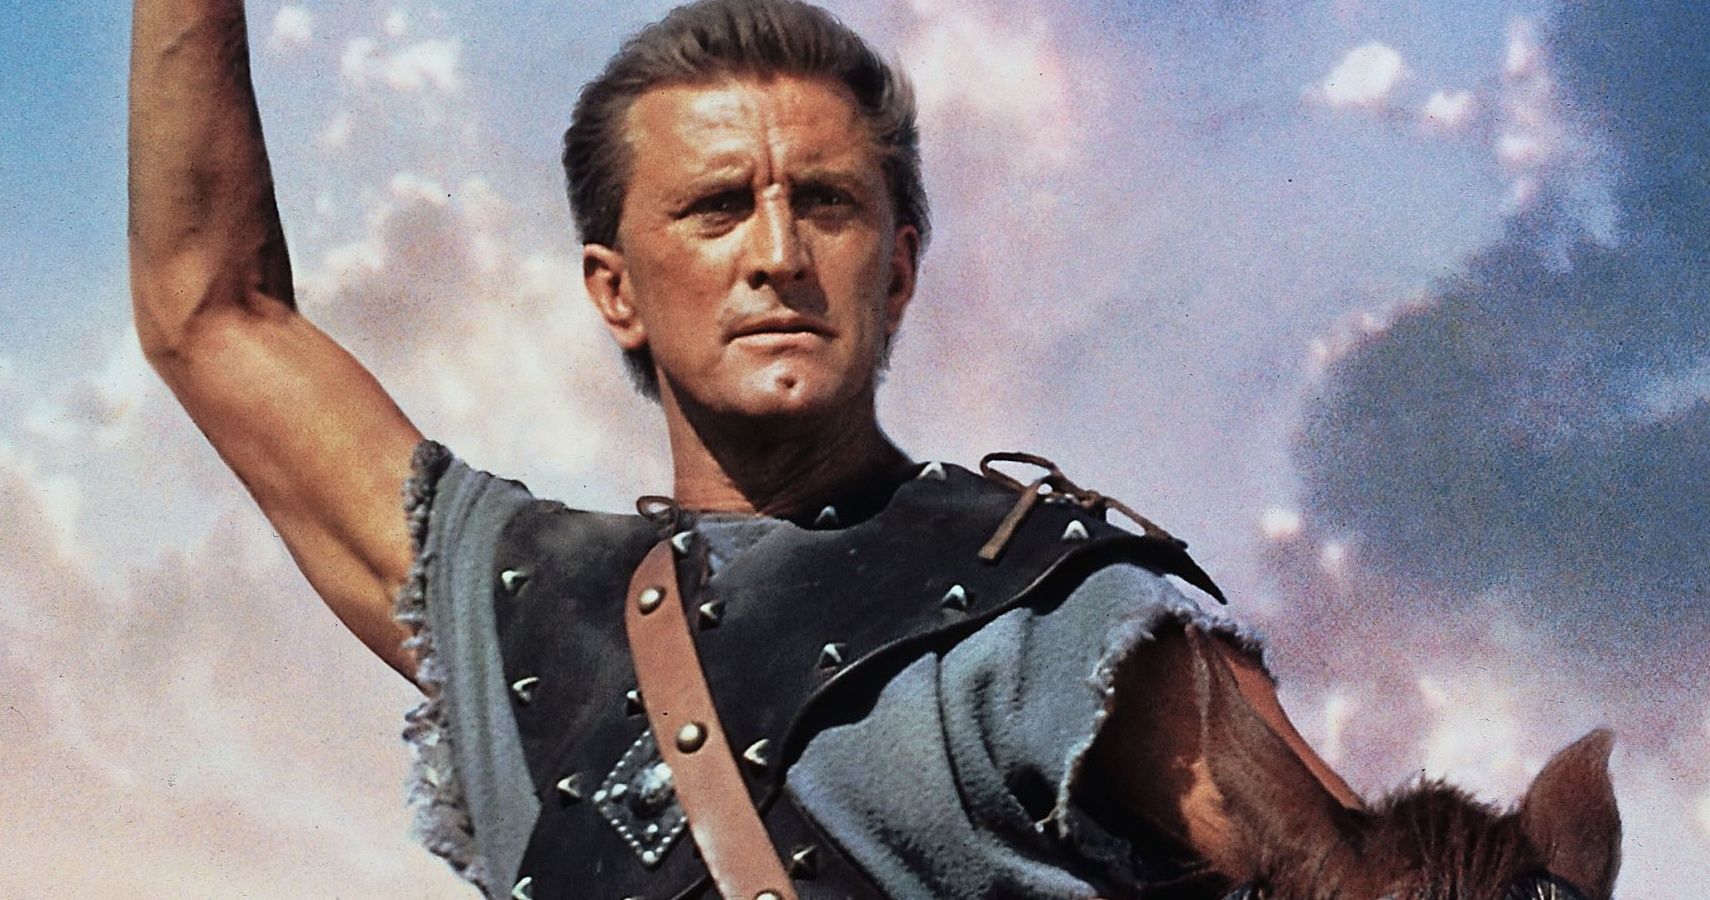 Kirk Douglas raising his arm and riding a horse in Spartacus